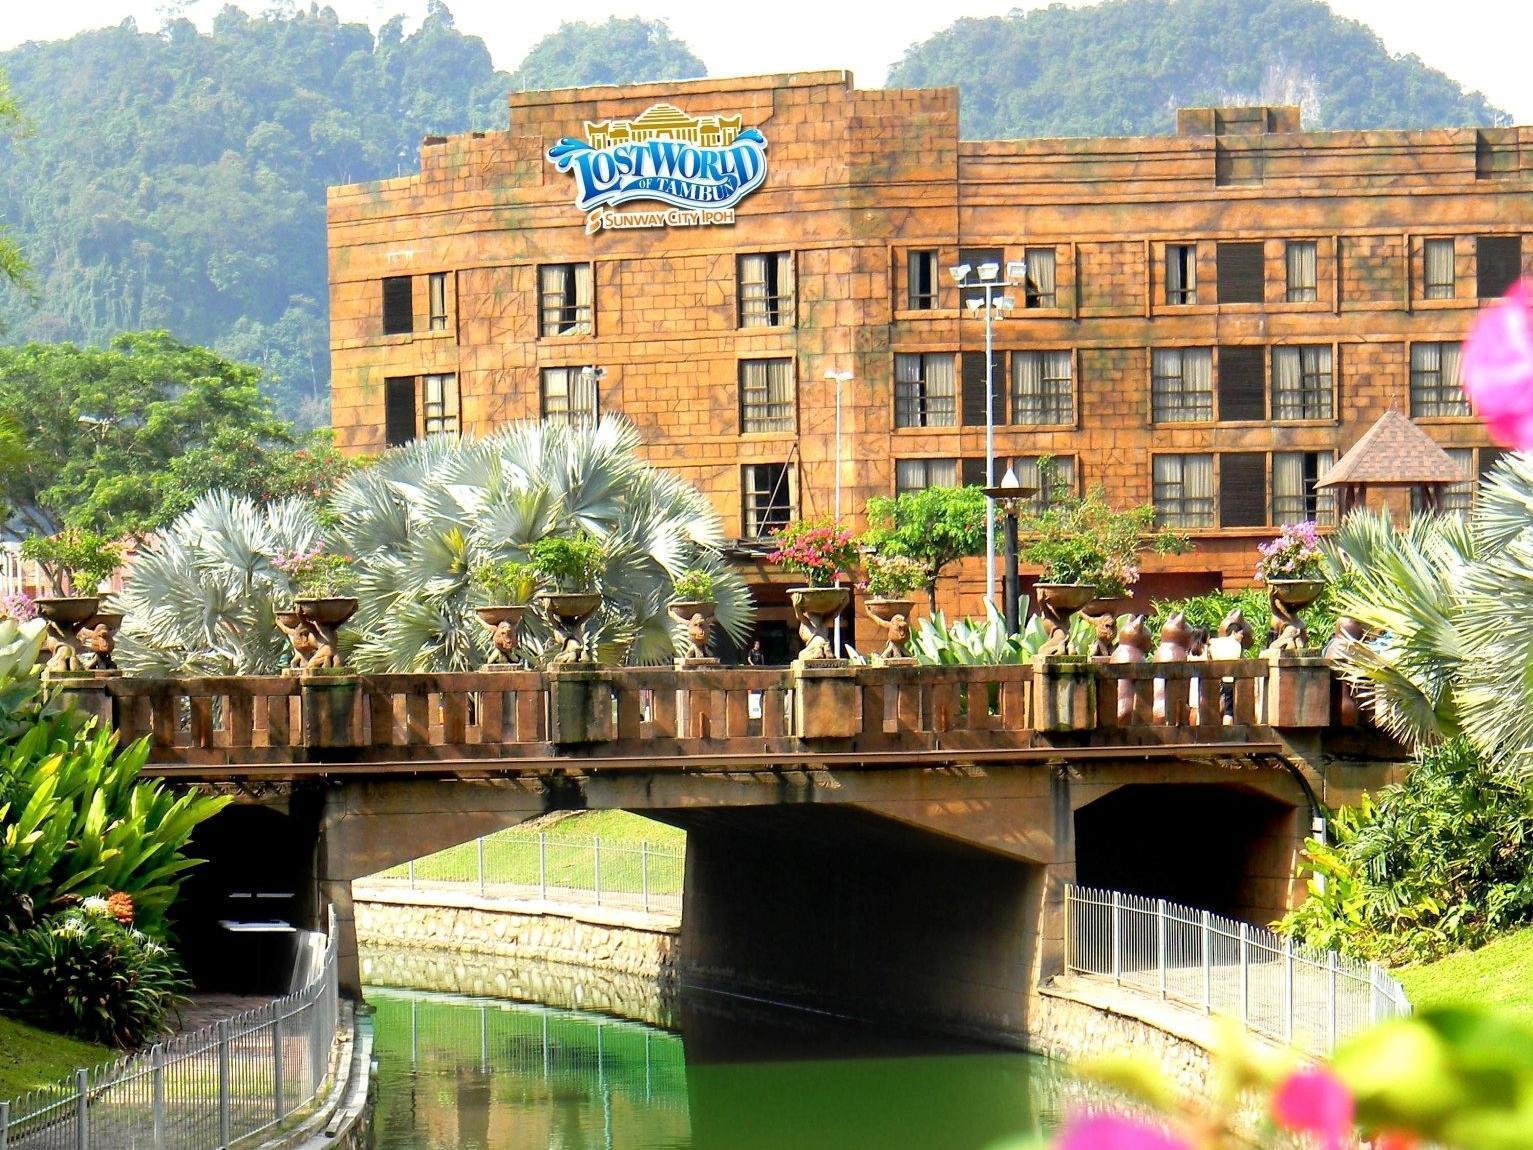 Sunway Lost World Hotel Ipoh Exterior photo